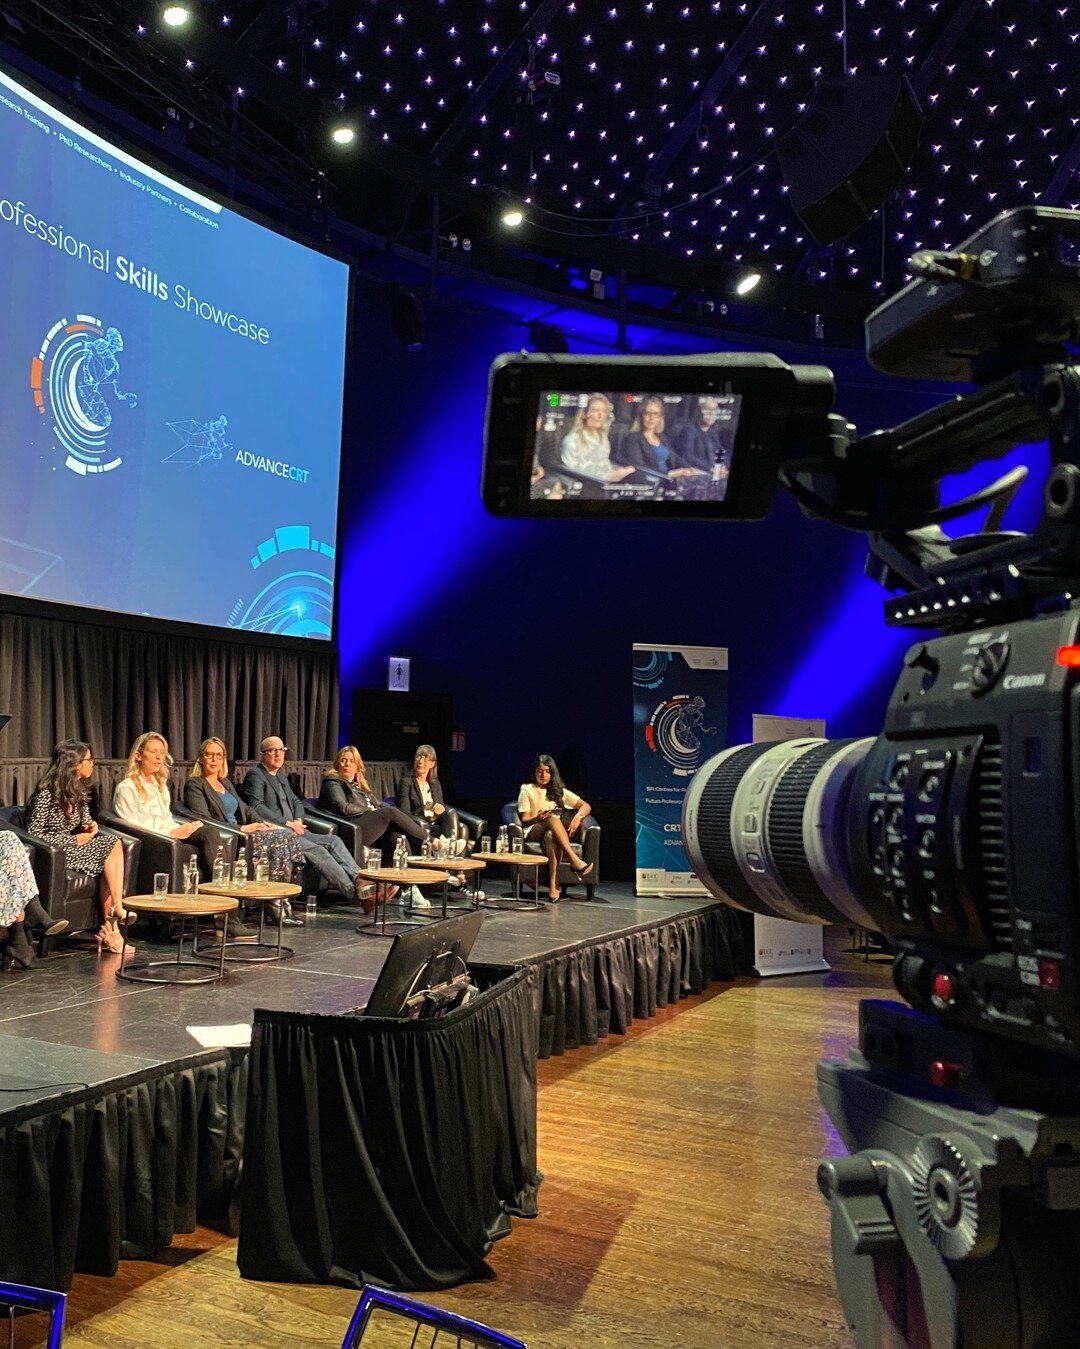 BTS shot filming Round Table Tech Discussion.

For more info please visit avalanchemultimediastudios.com #corporatevideoproduction #corporatevideoproductionireland #corporatevideoproductionservices #irishcorporatevideosireland #ireland #avalanchemult